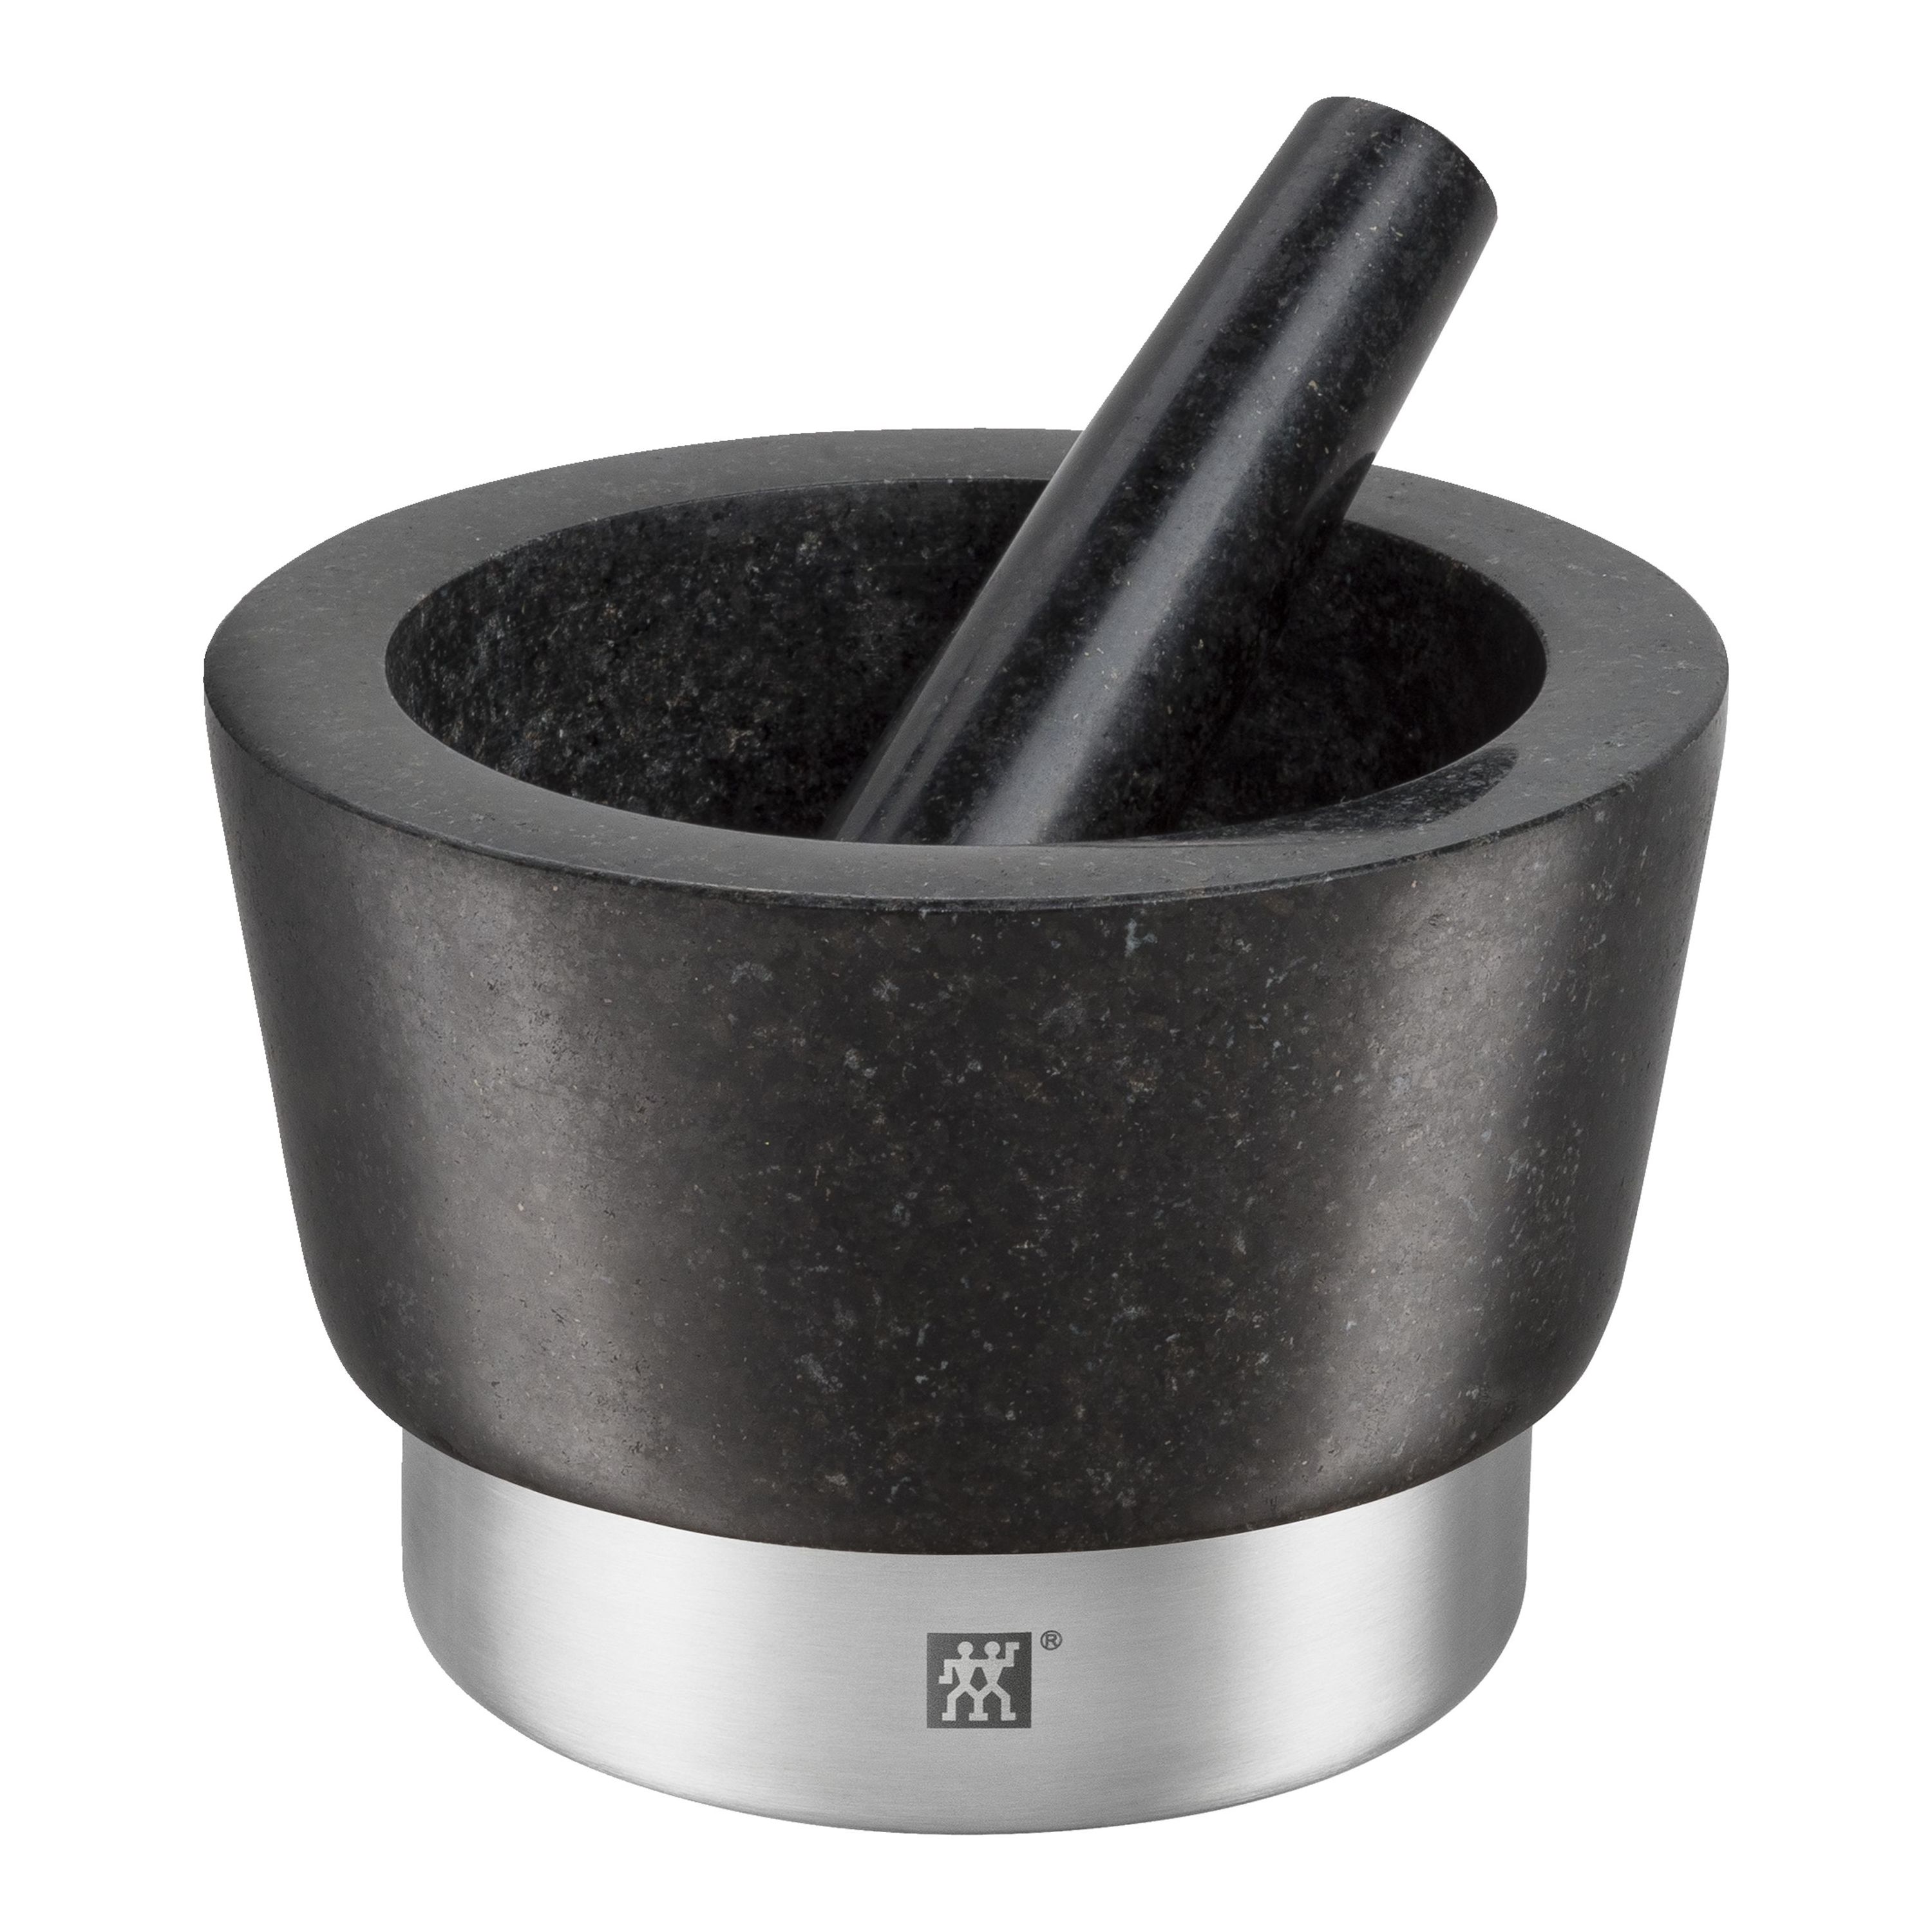 Square 250 ml Polished Stone Mortar 9.5 x 11 x 11 cm Grey Herbs Durable Relaxdays 10029955 Granite Pestle Spices 